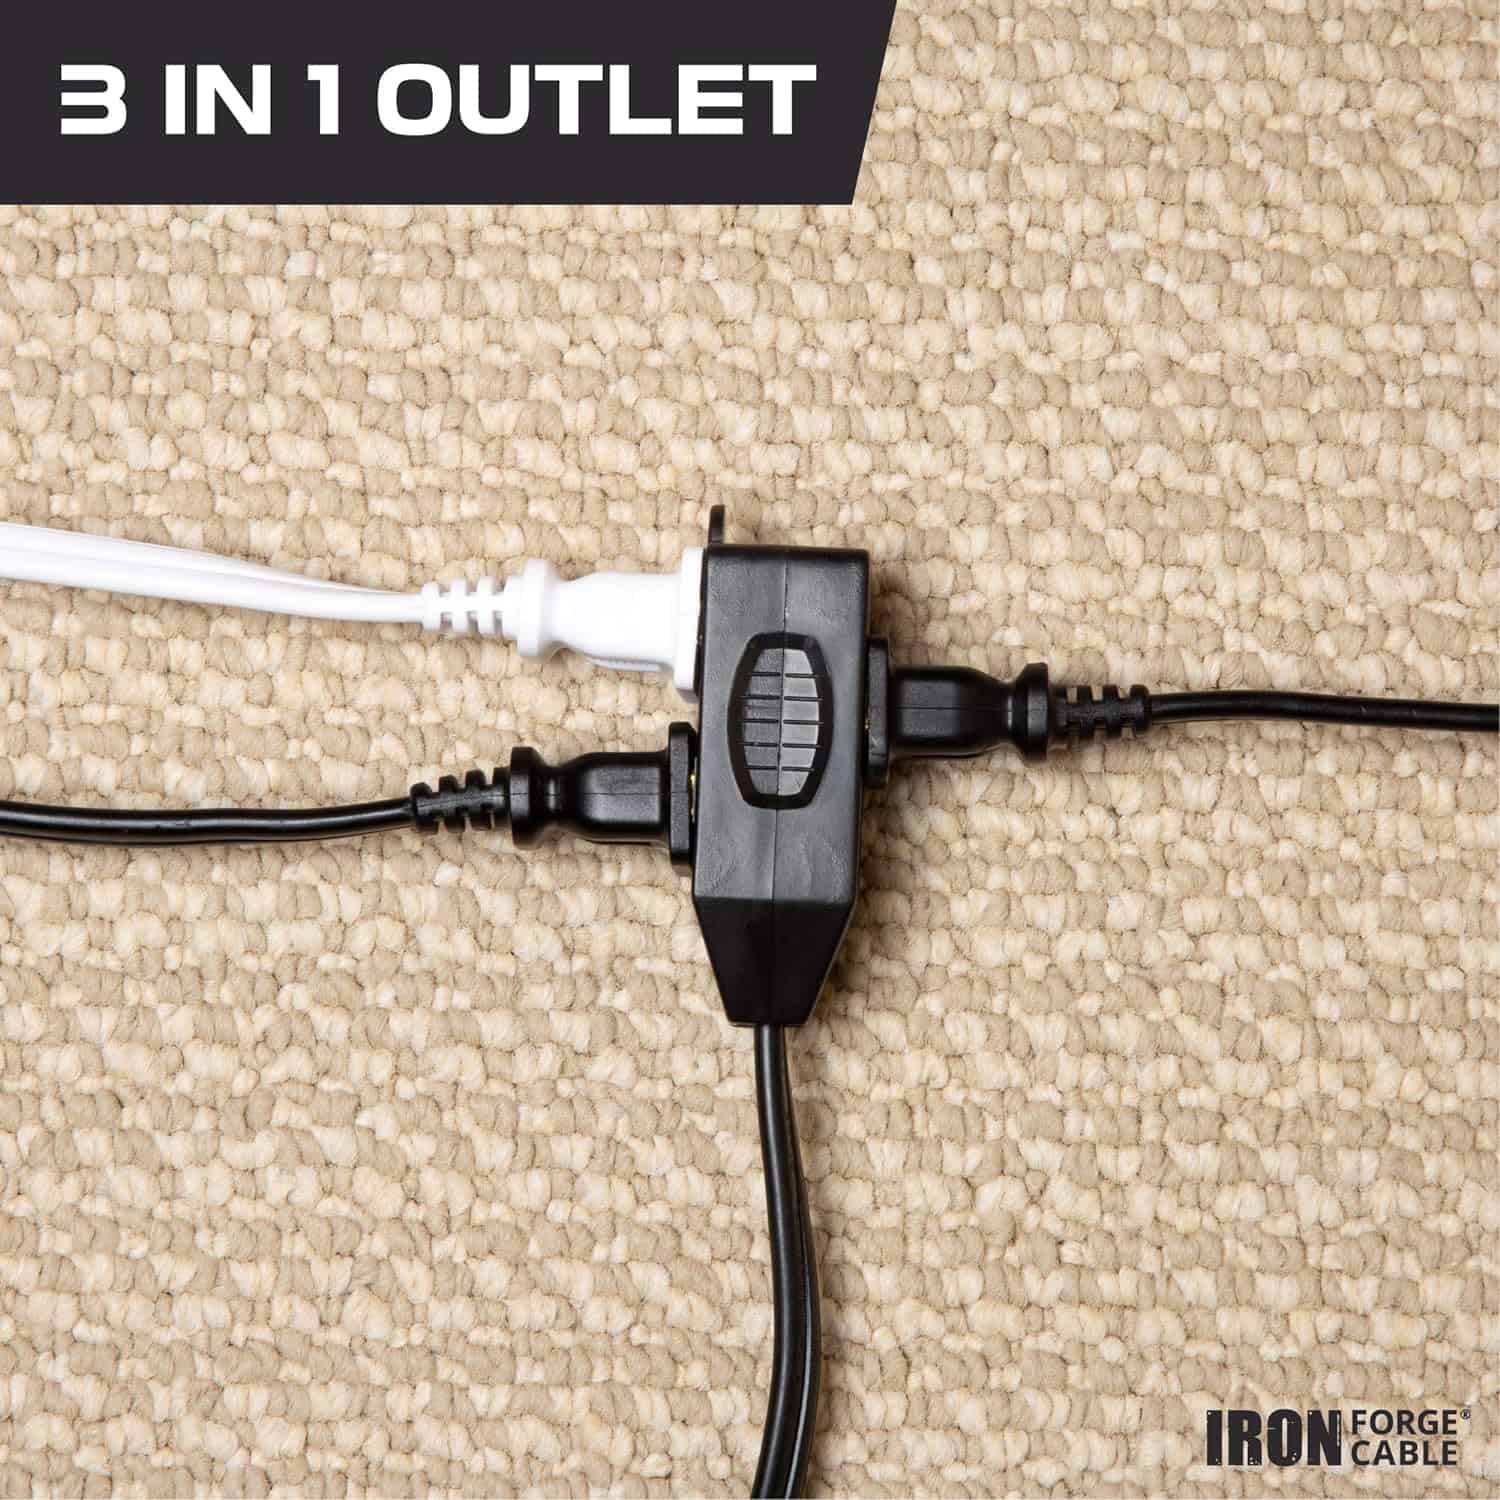 Iron Forge Cable 15 Ft Black Extension Cord with 3 Outlets 16 2 Indoor Extension Cord with Multiple Outlets 13 AMP 2 Prong Electrical Cable for Home Office Household Appliances 4 – Copy